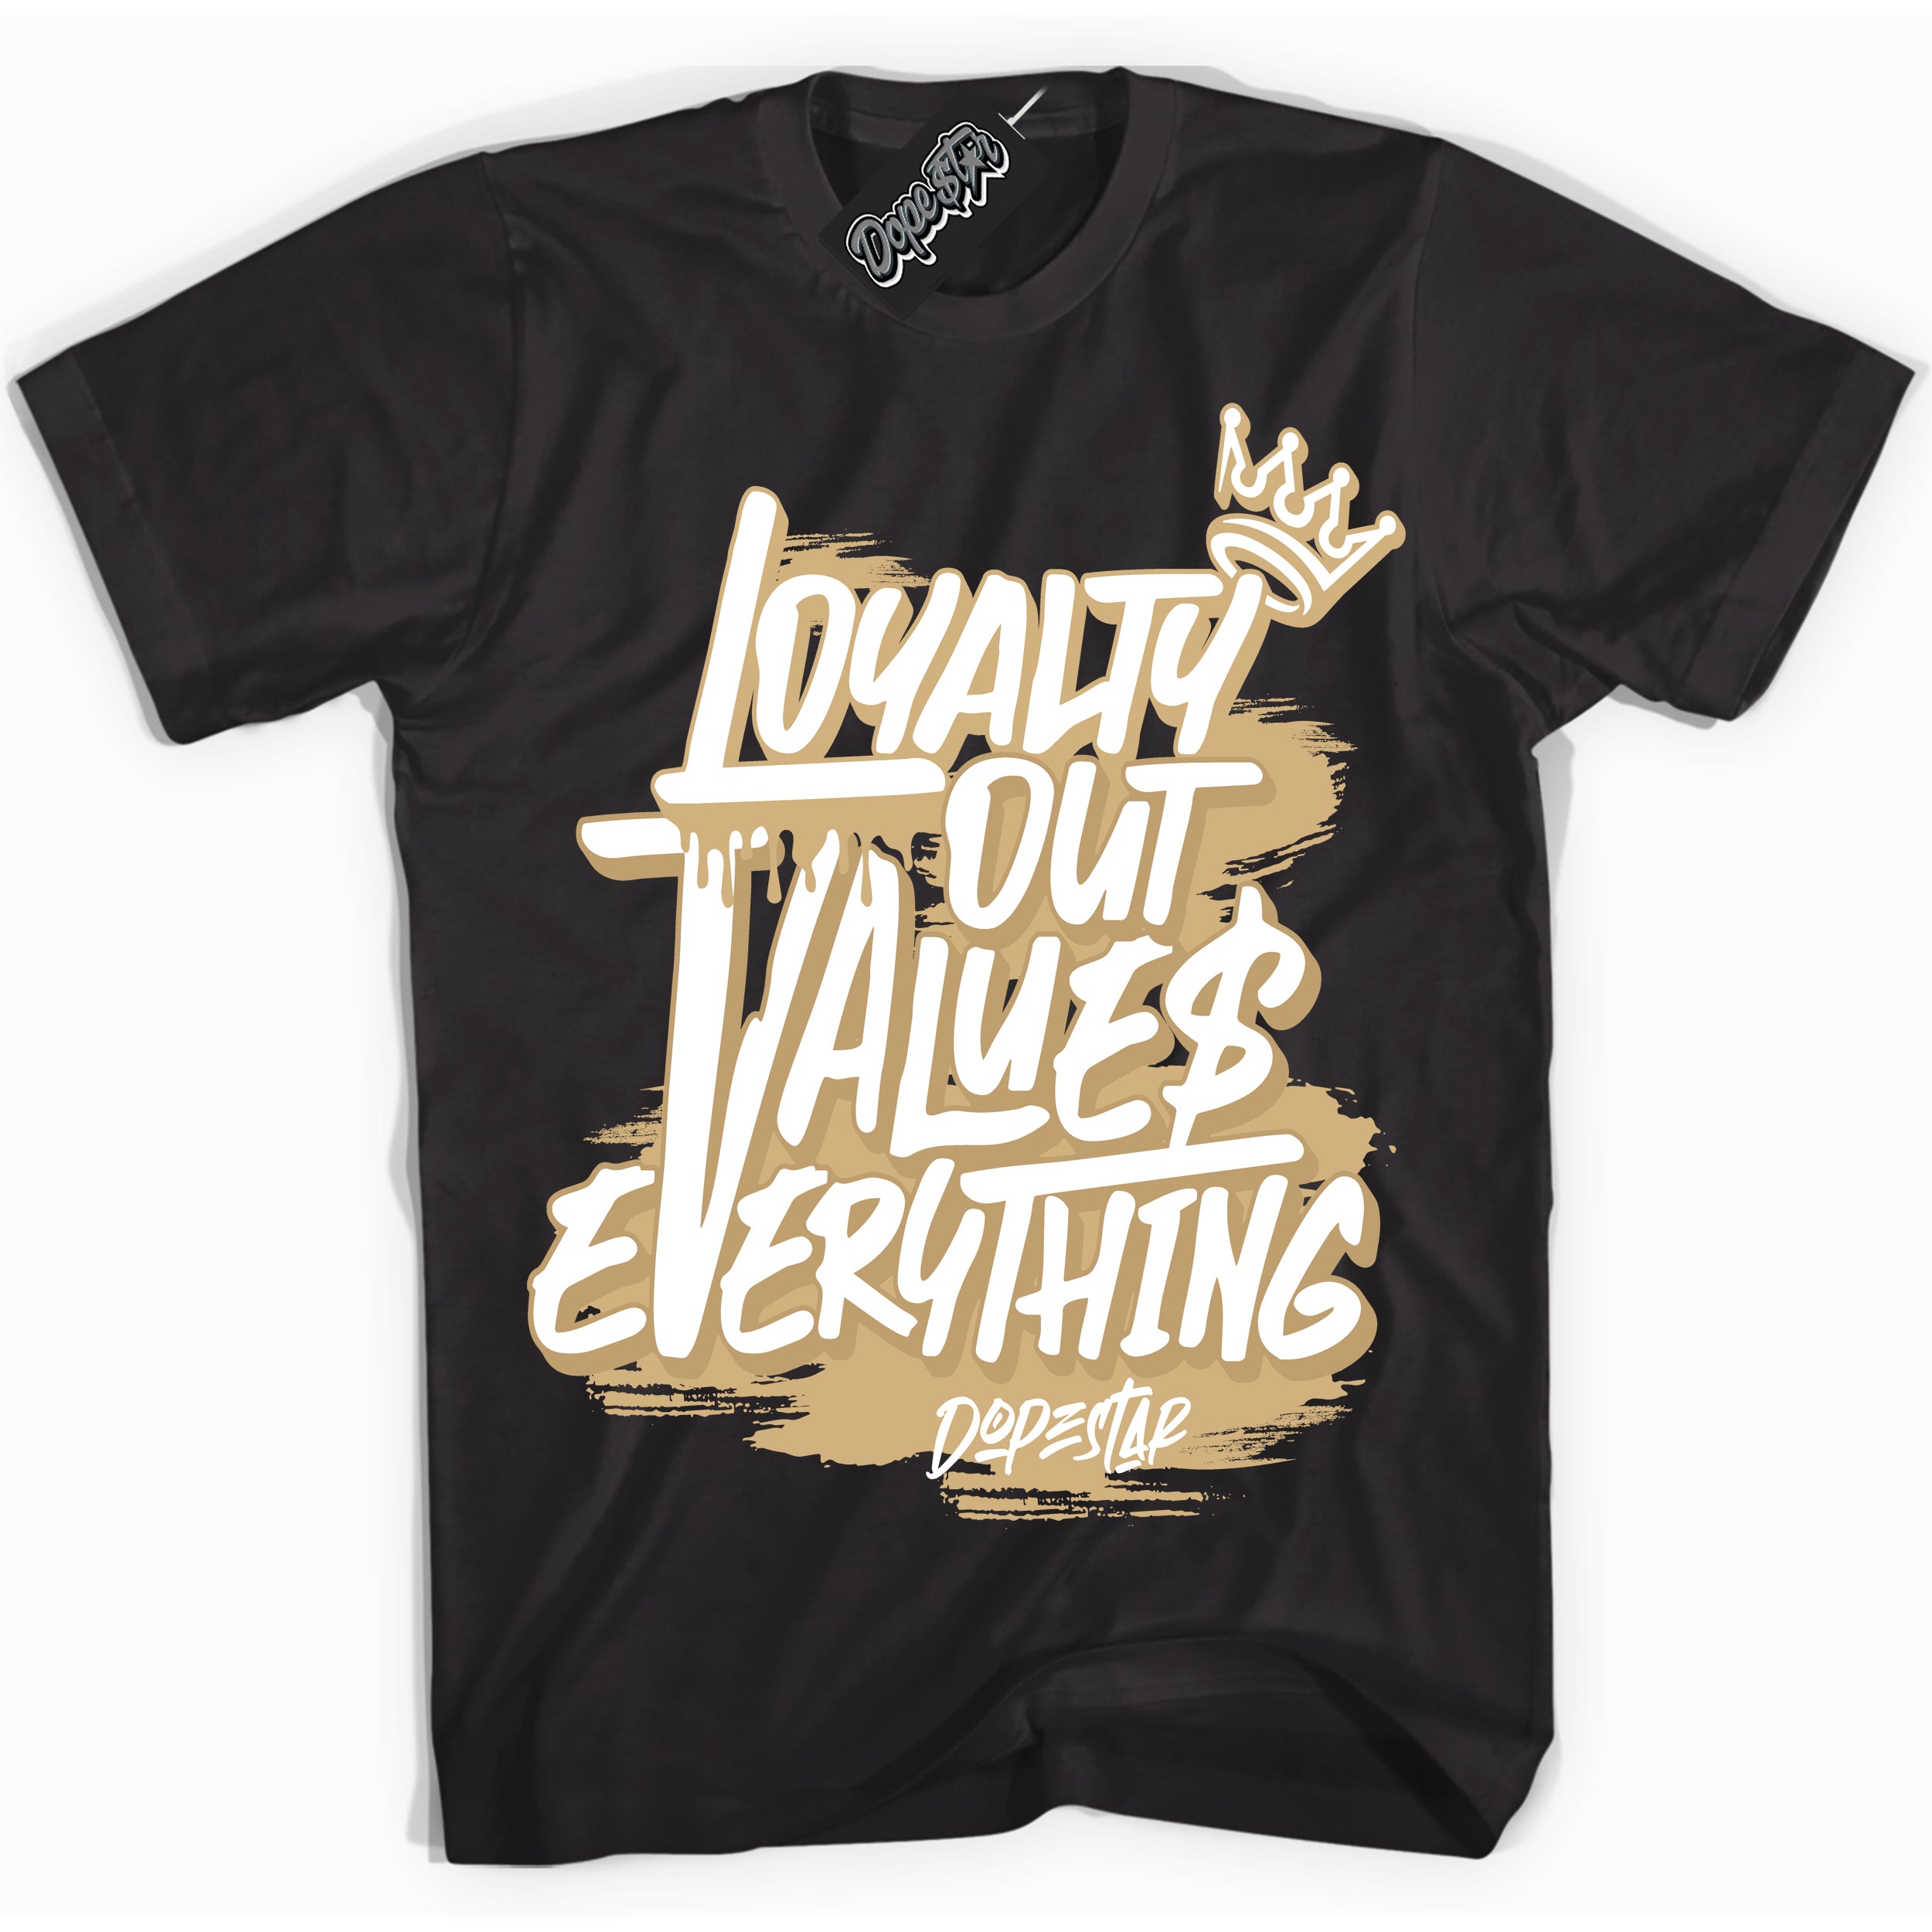 Cool Black Shirt with “ Loyalty Out Values Everything” design that perfectly matches Metallic Gold 1s Sneakers.